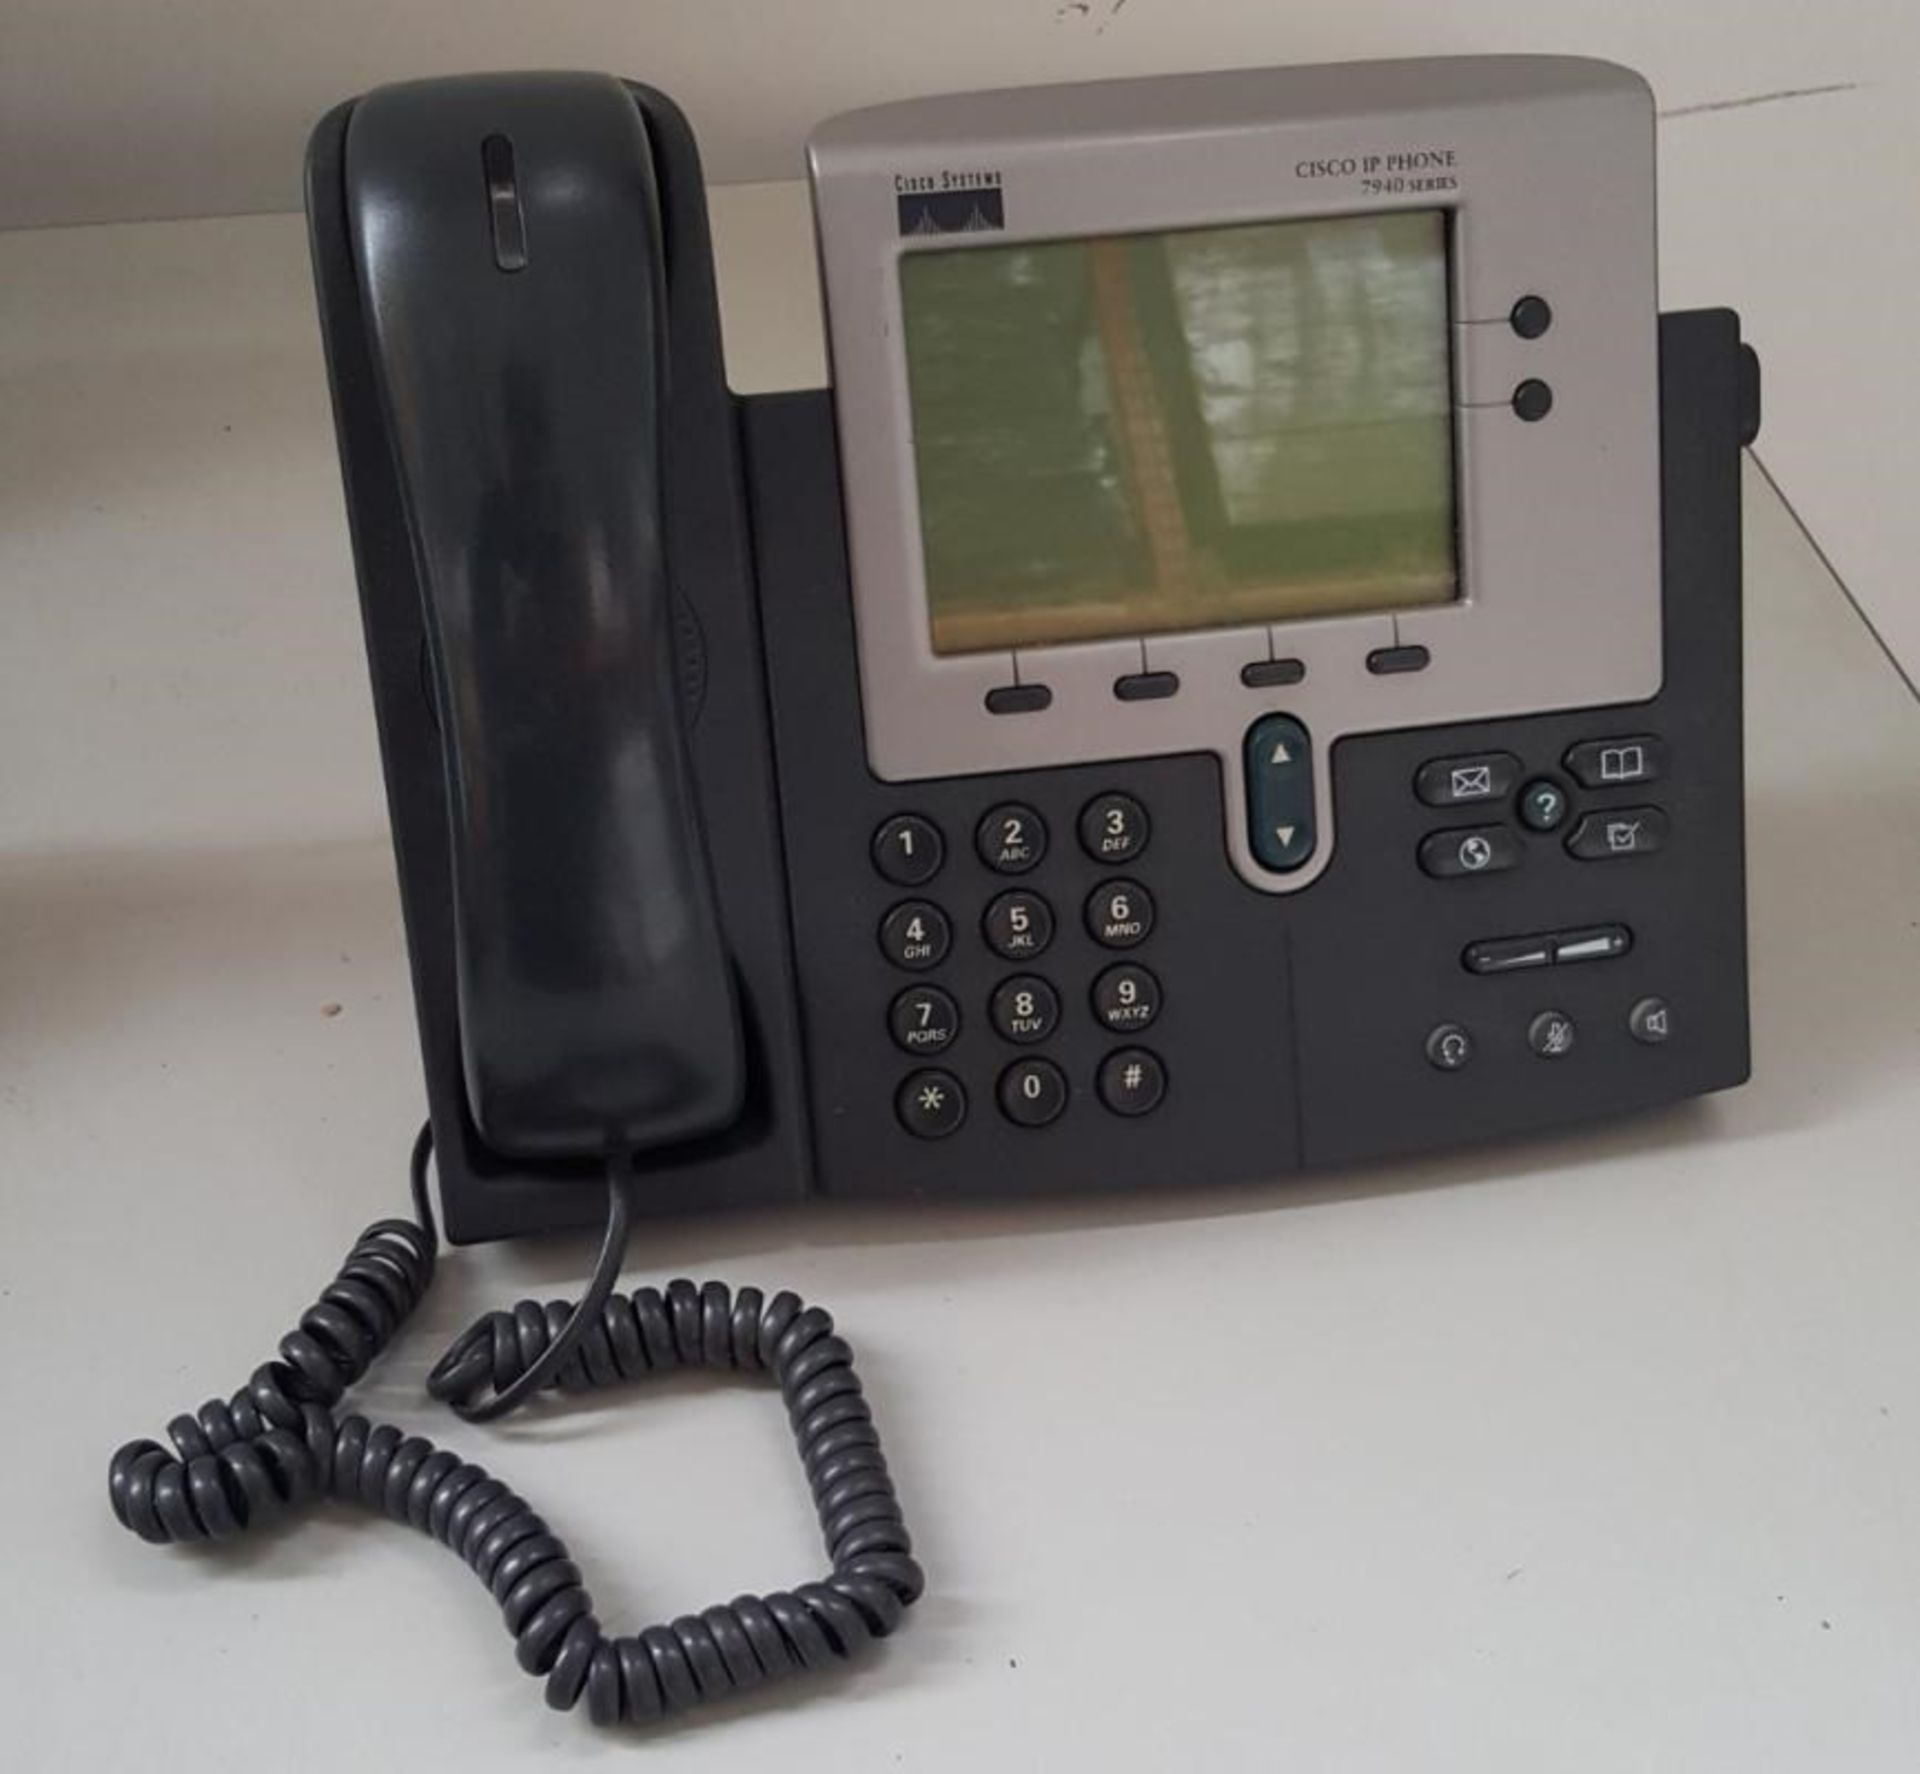 12 x Cisco 7940 IP System Office Telephone - Ref RB249 J2 - CL011 - Location: Altrincham WA14As - Image 4 of 4